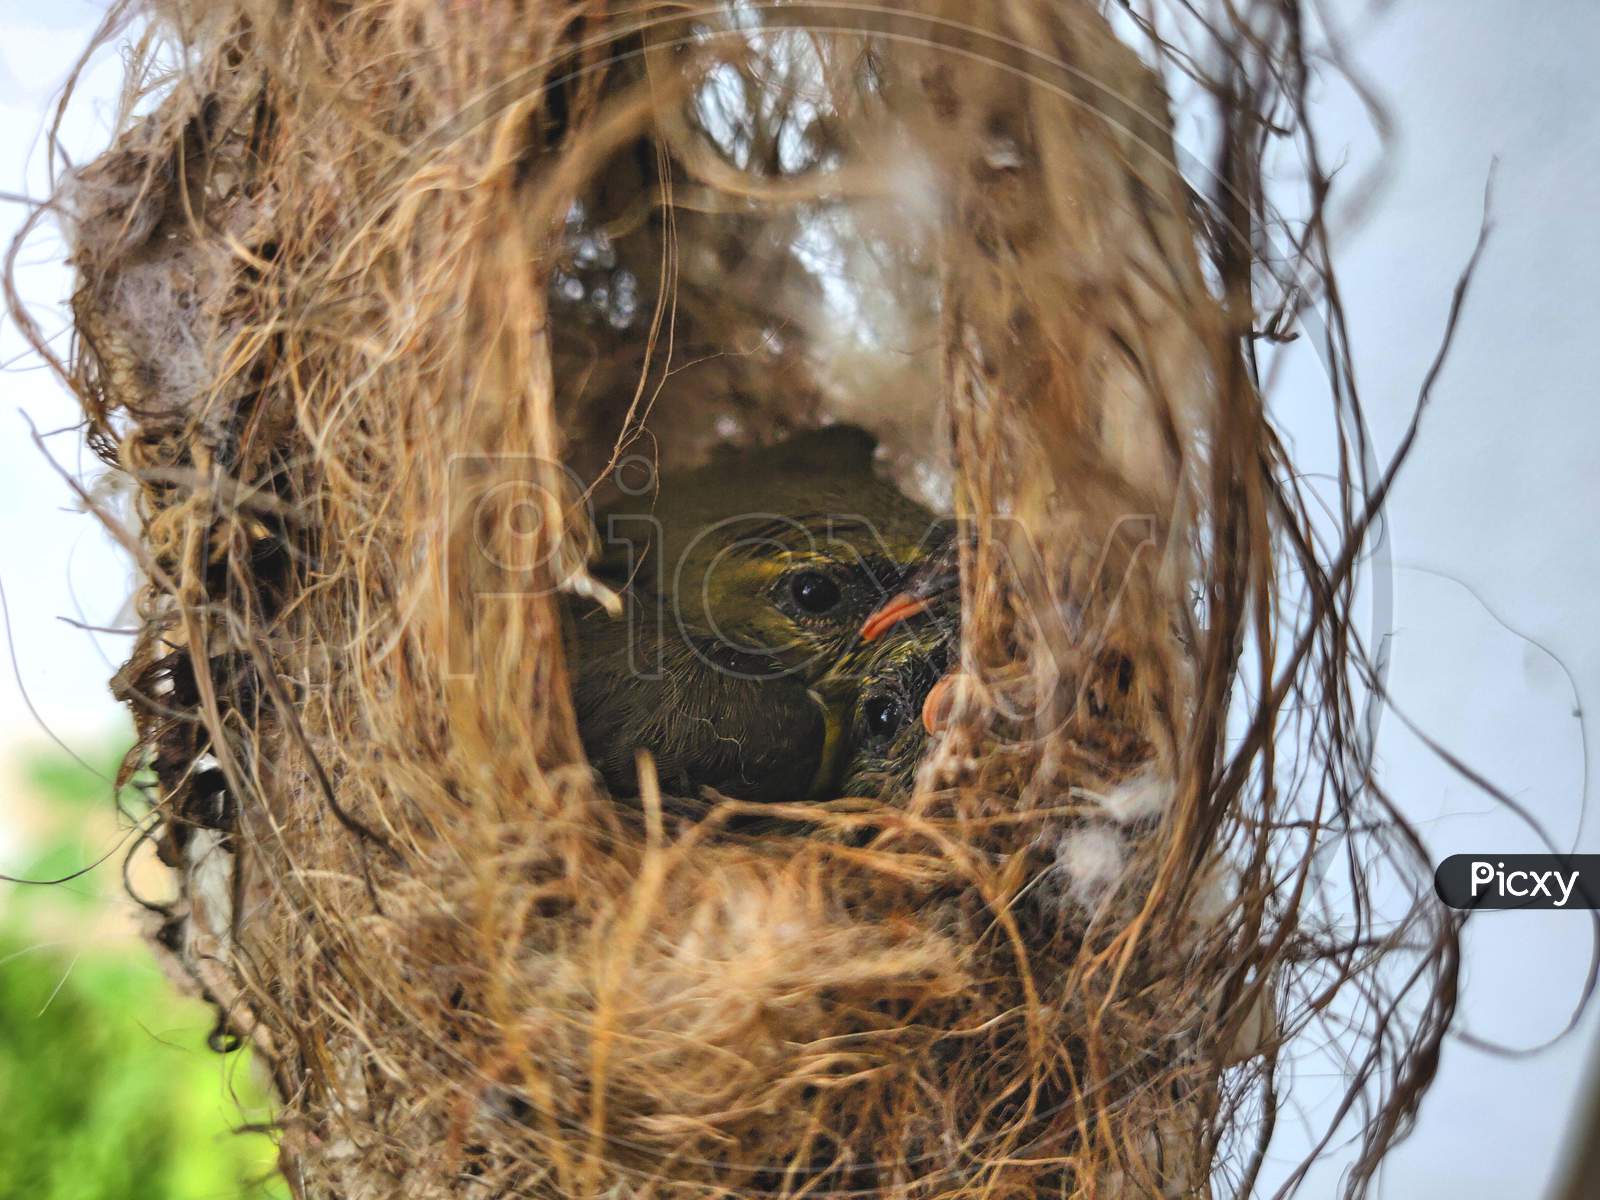 Baby bird peeping out of nest